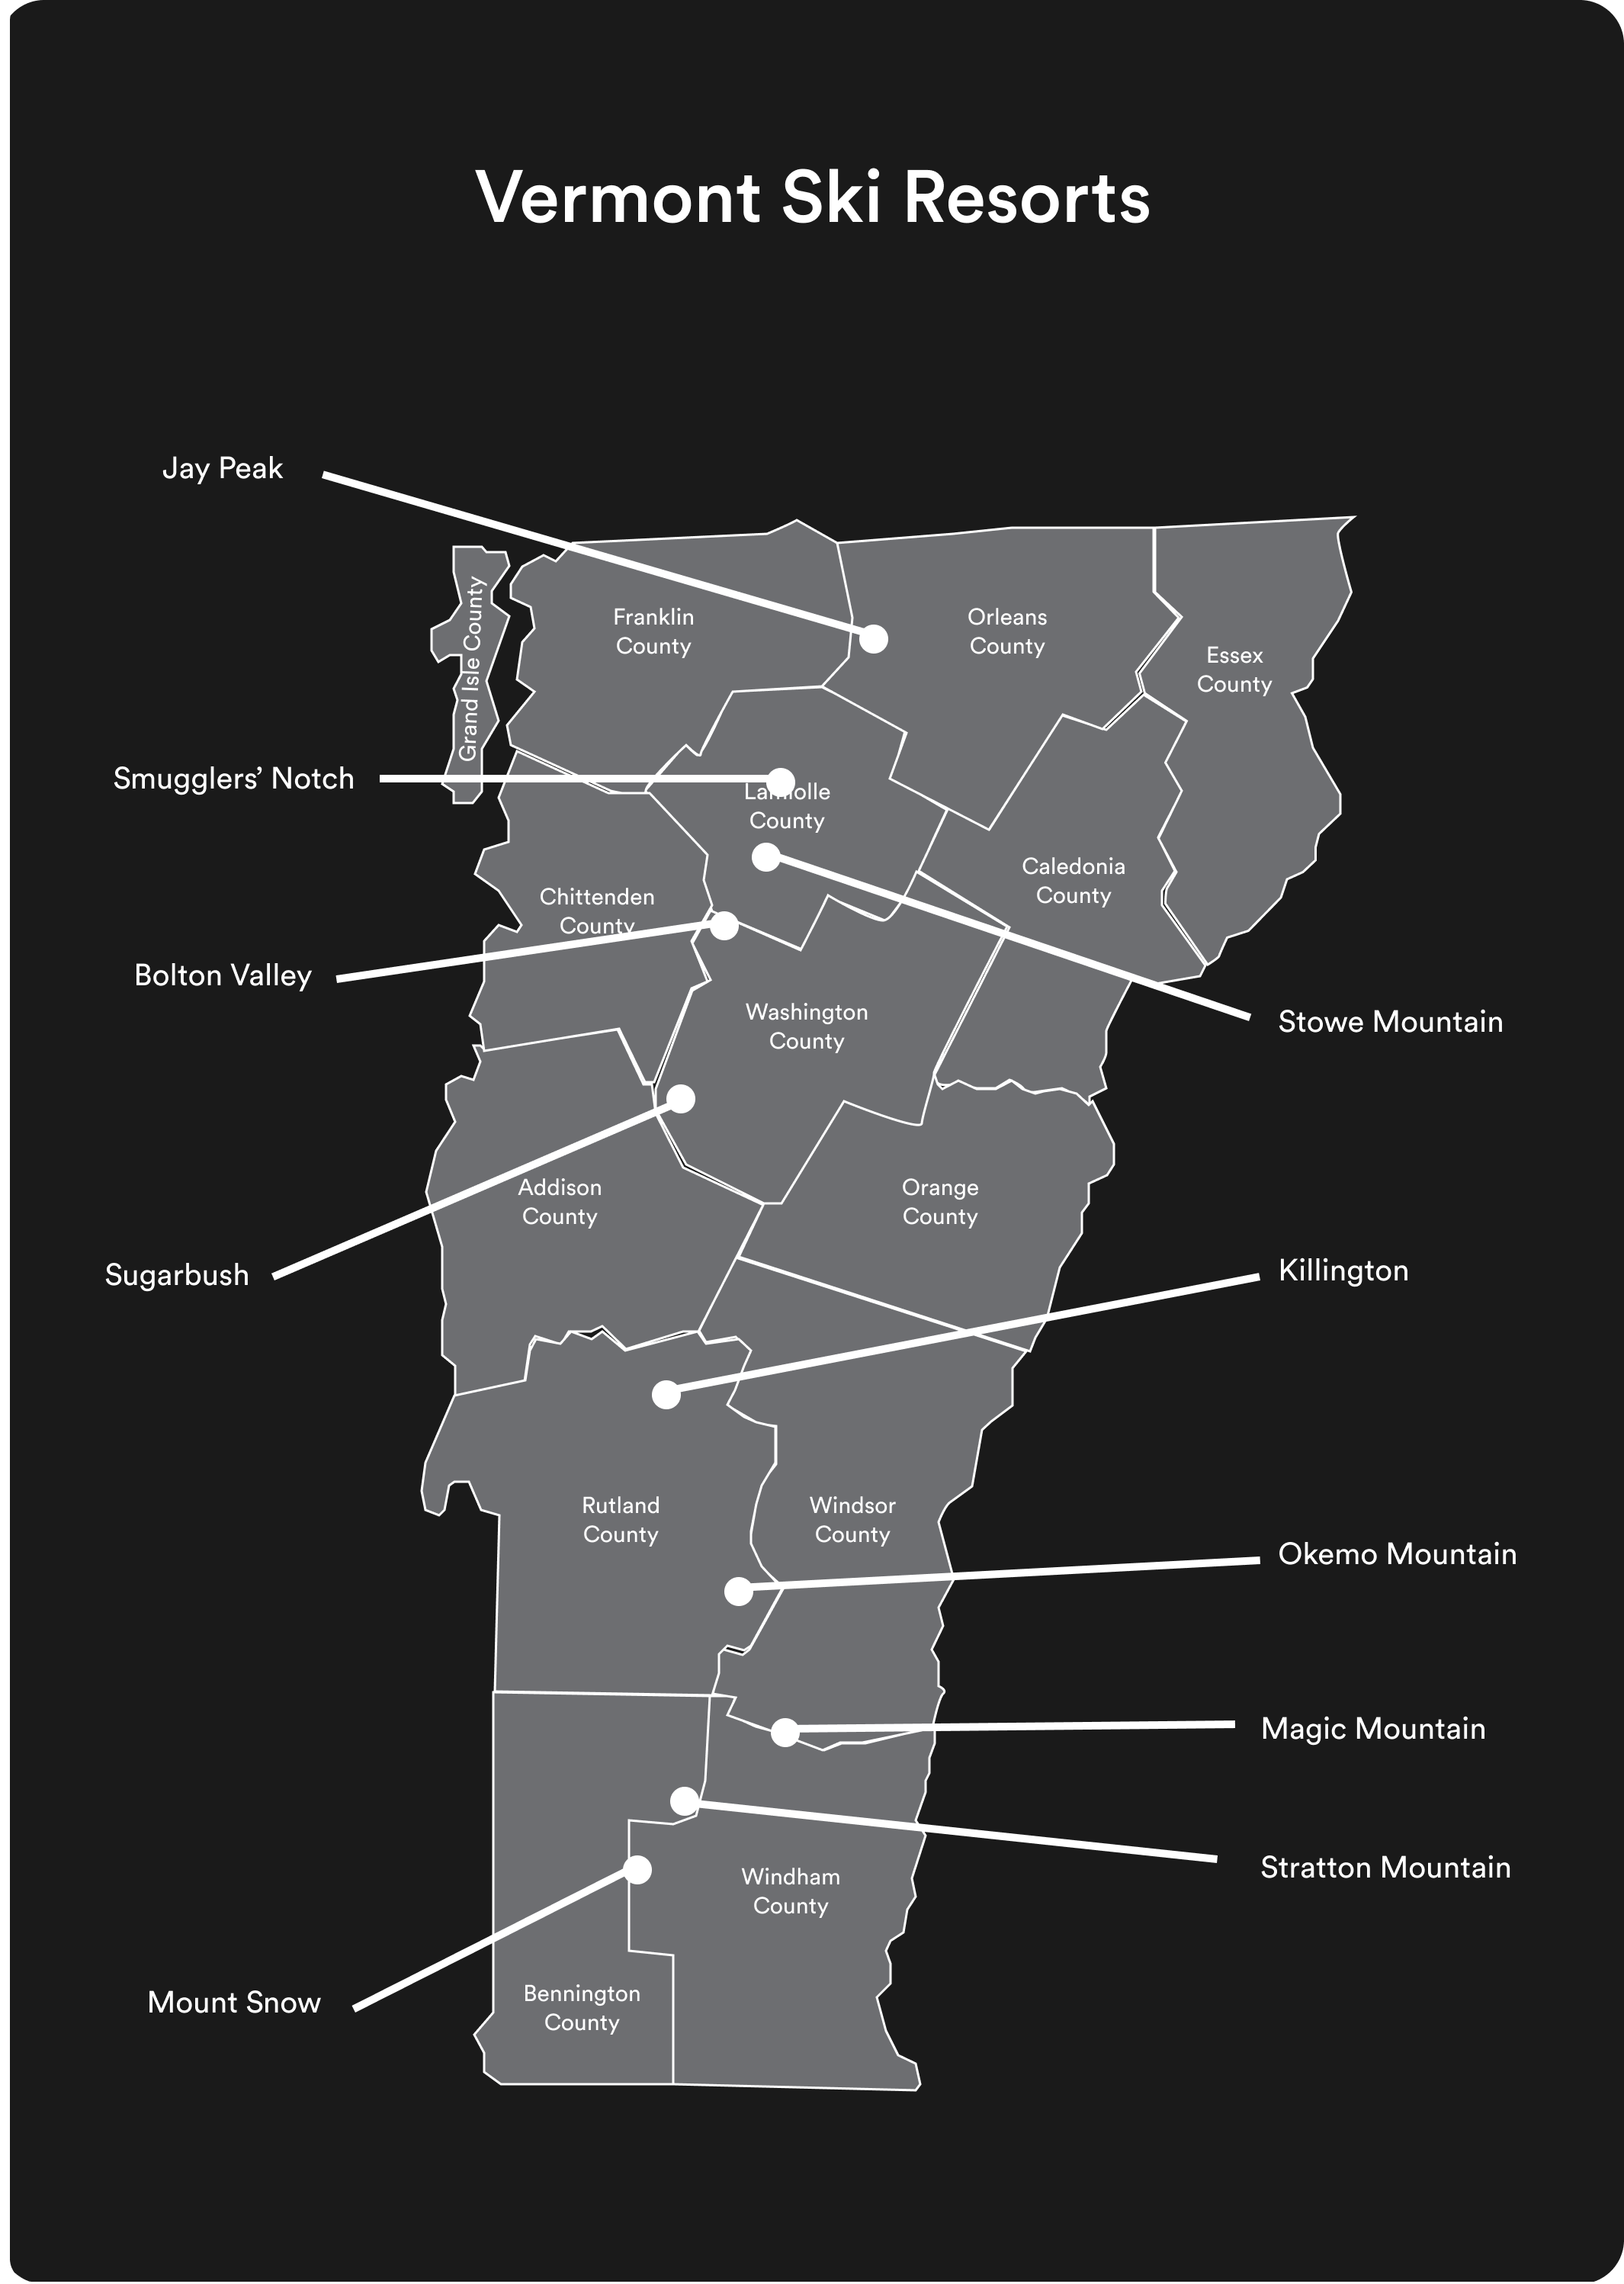 A map showing the ski resorts on Vermont